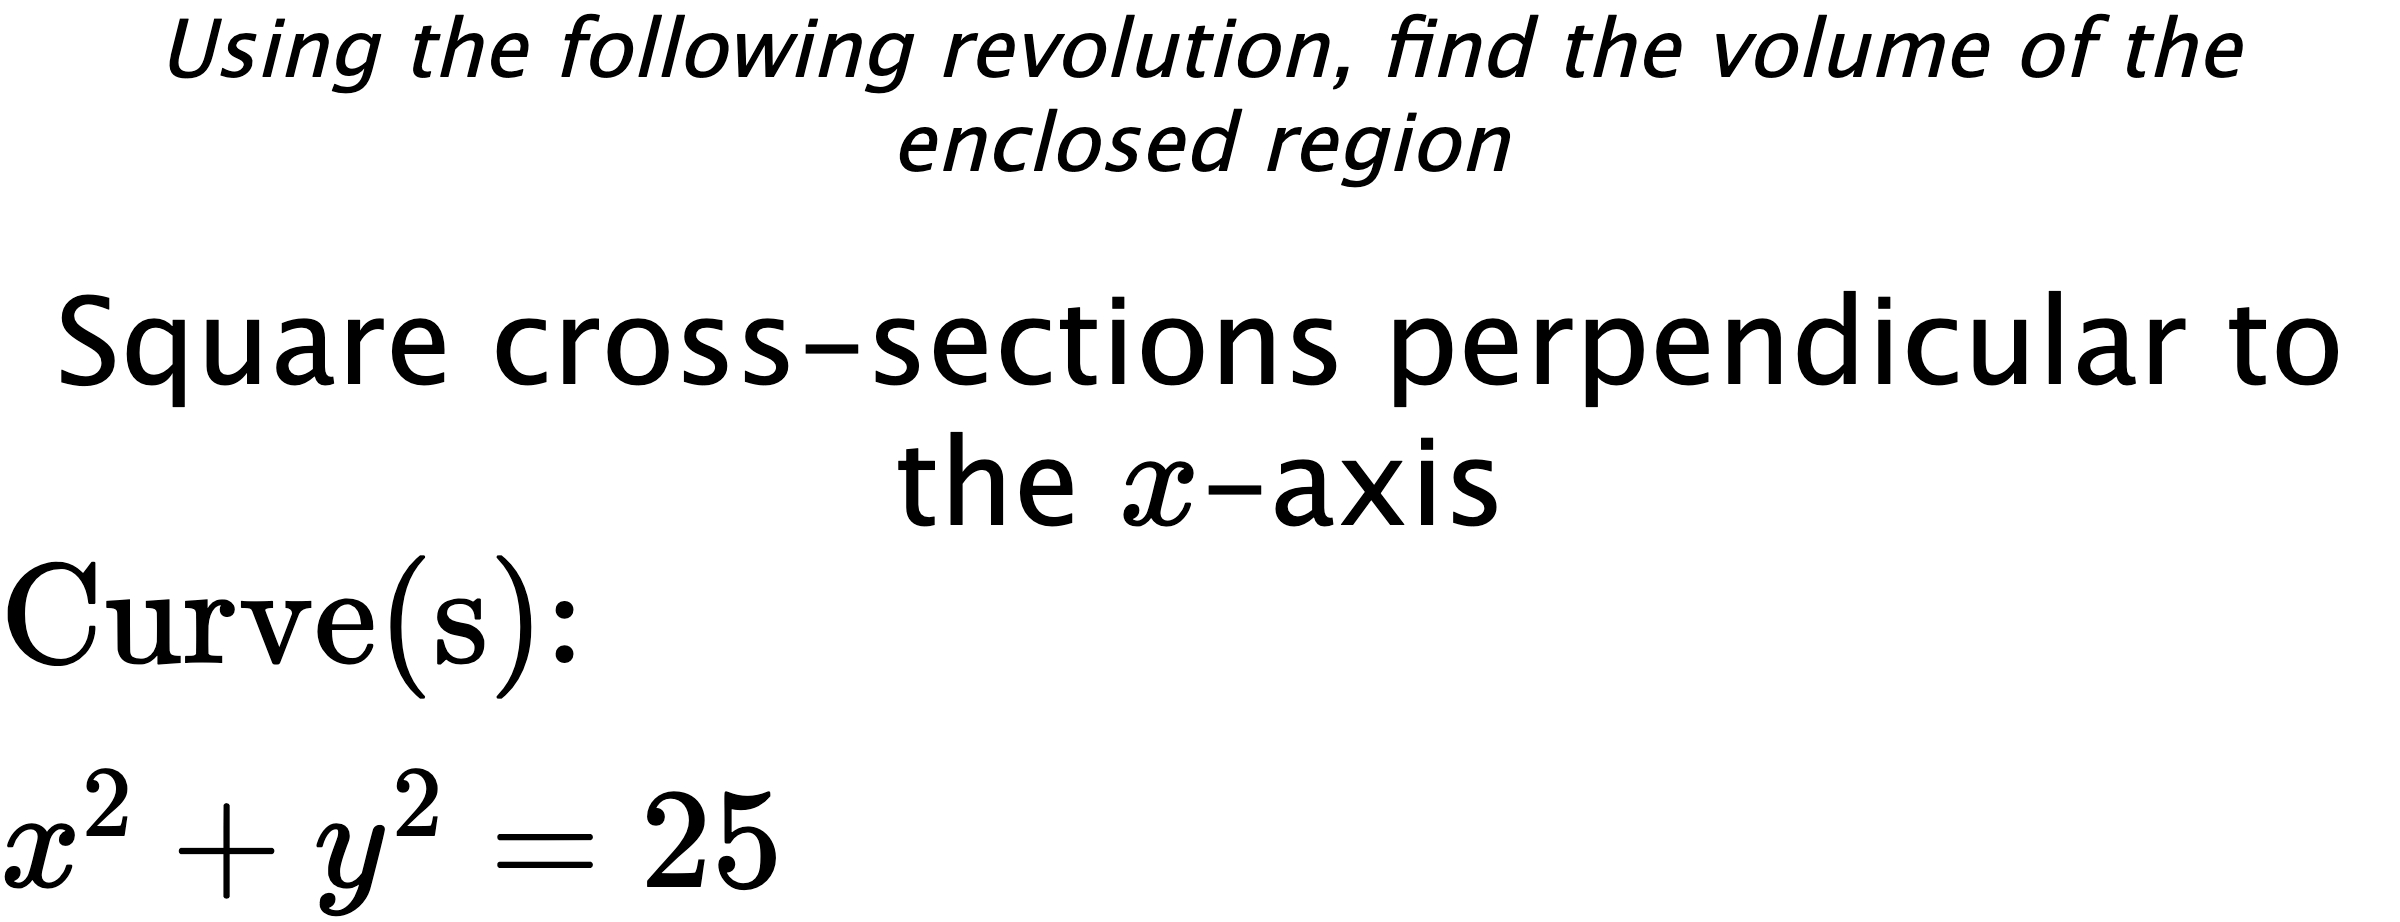 Using the following revolution, find the volume of the enclosed region Square cross-sections perpendicular to the $ x $-axis $ \\ \text{Curve(s):} \\ x^{2}+y^{2}=25 $